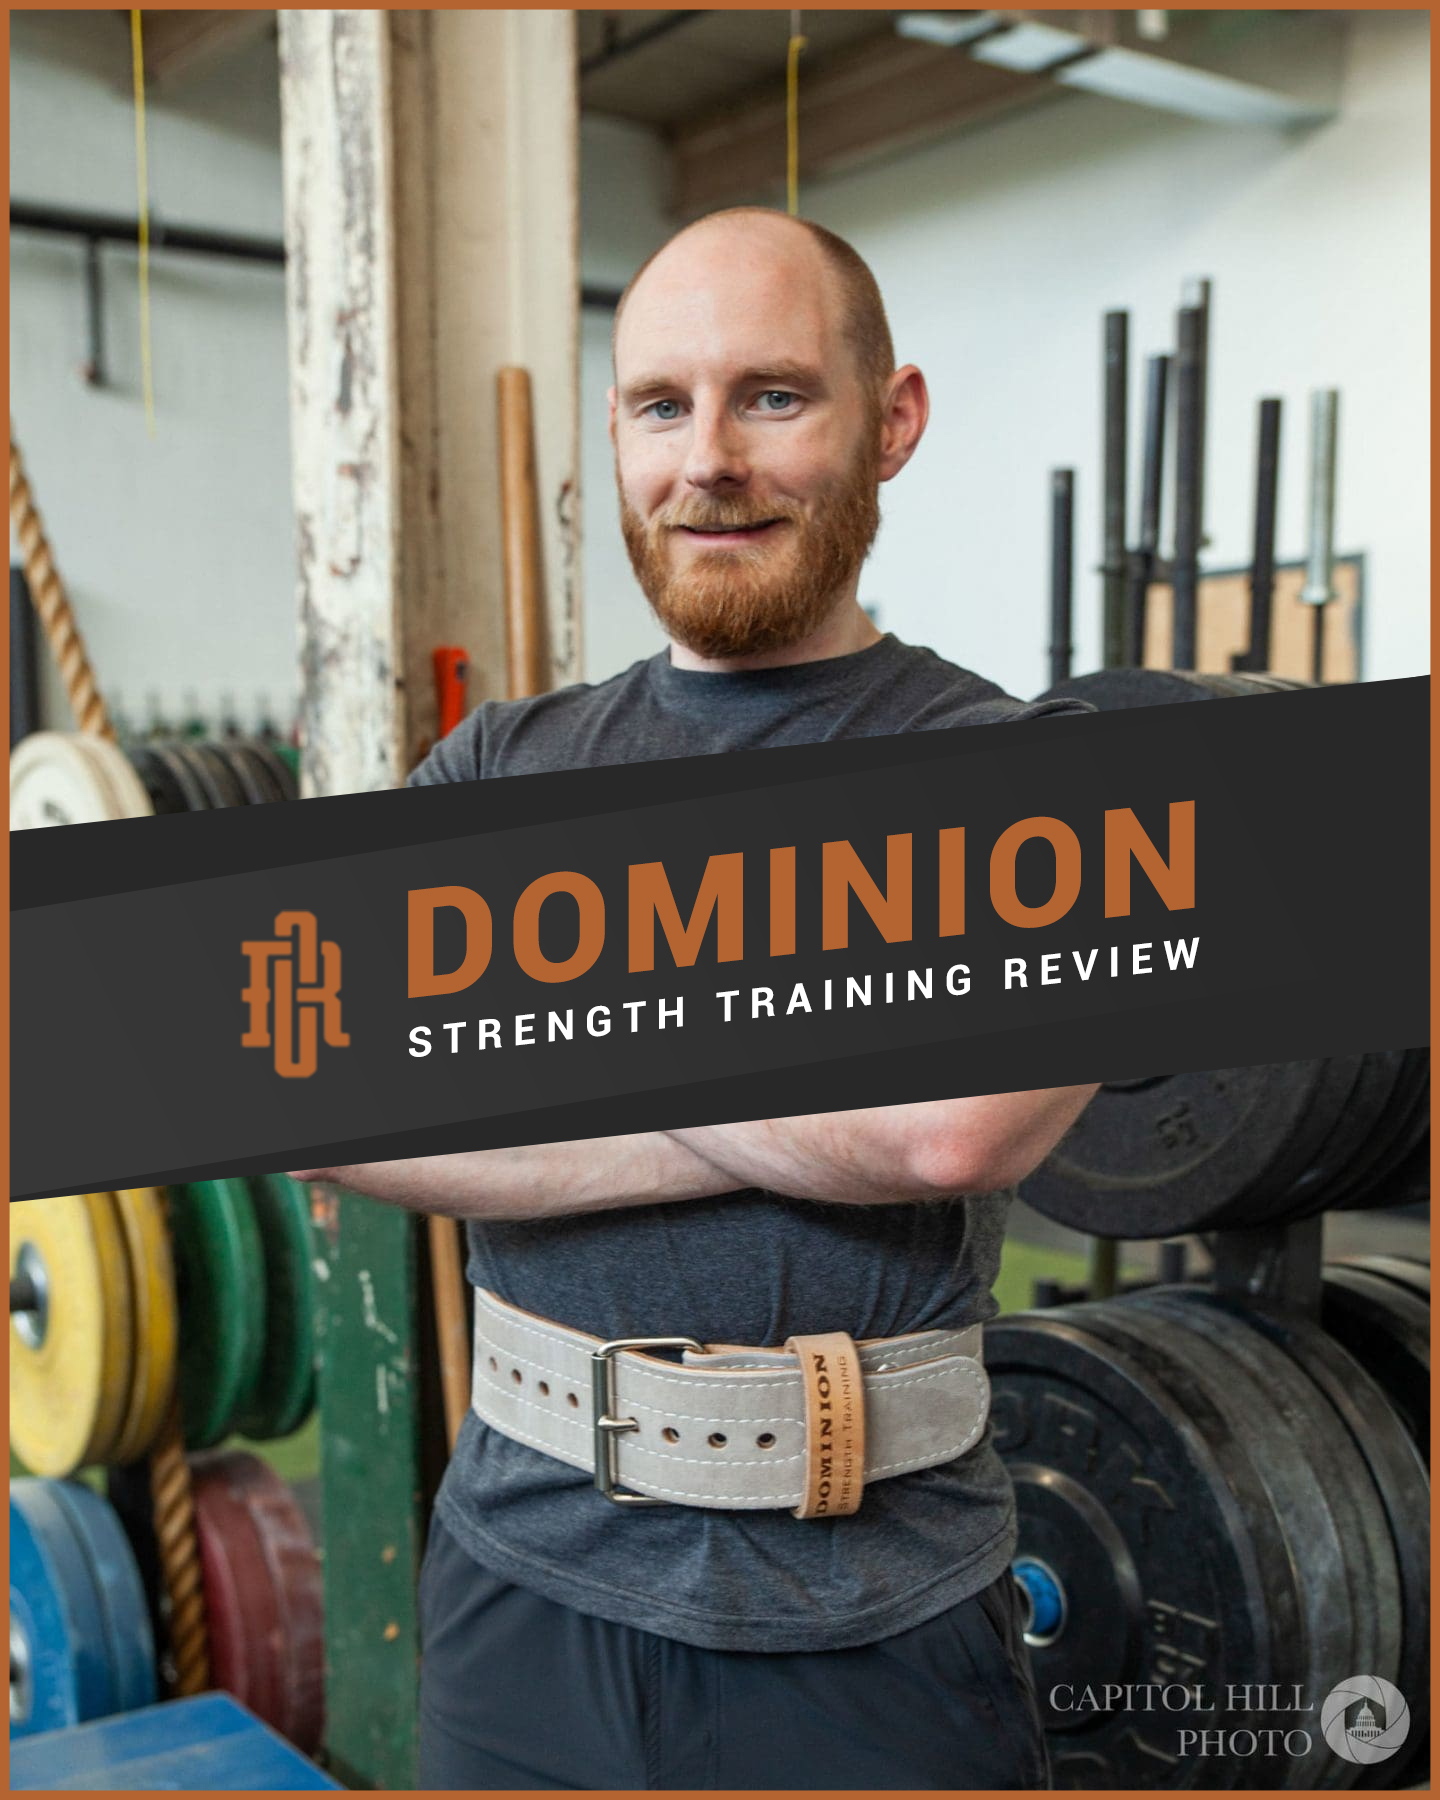 Dominion Strength Training Review